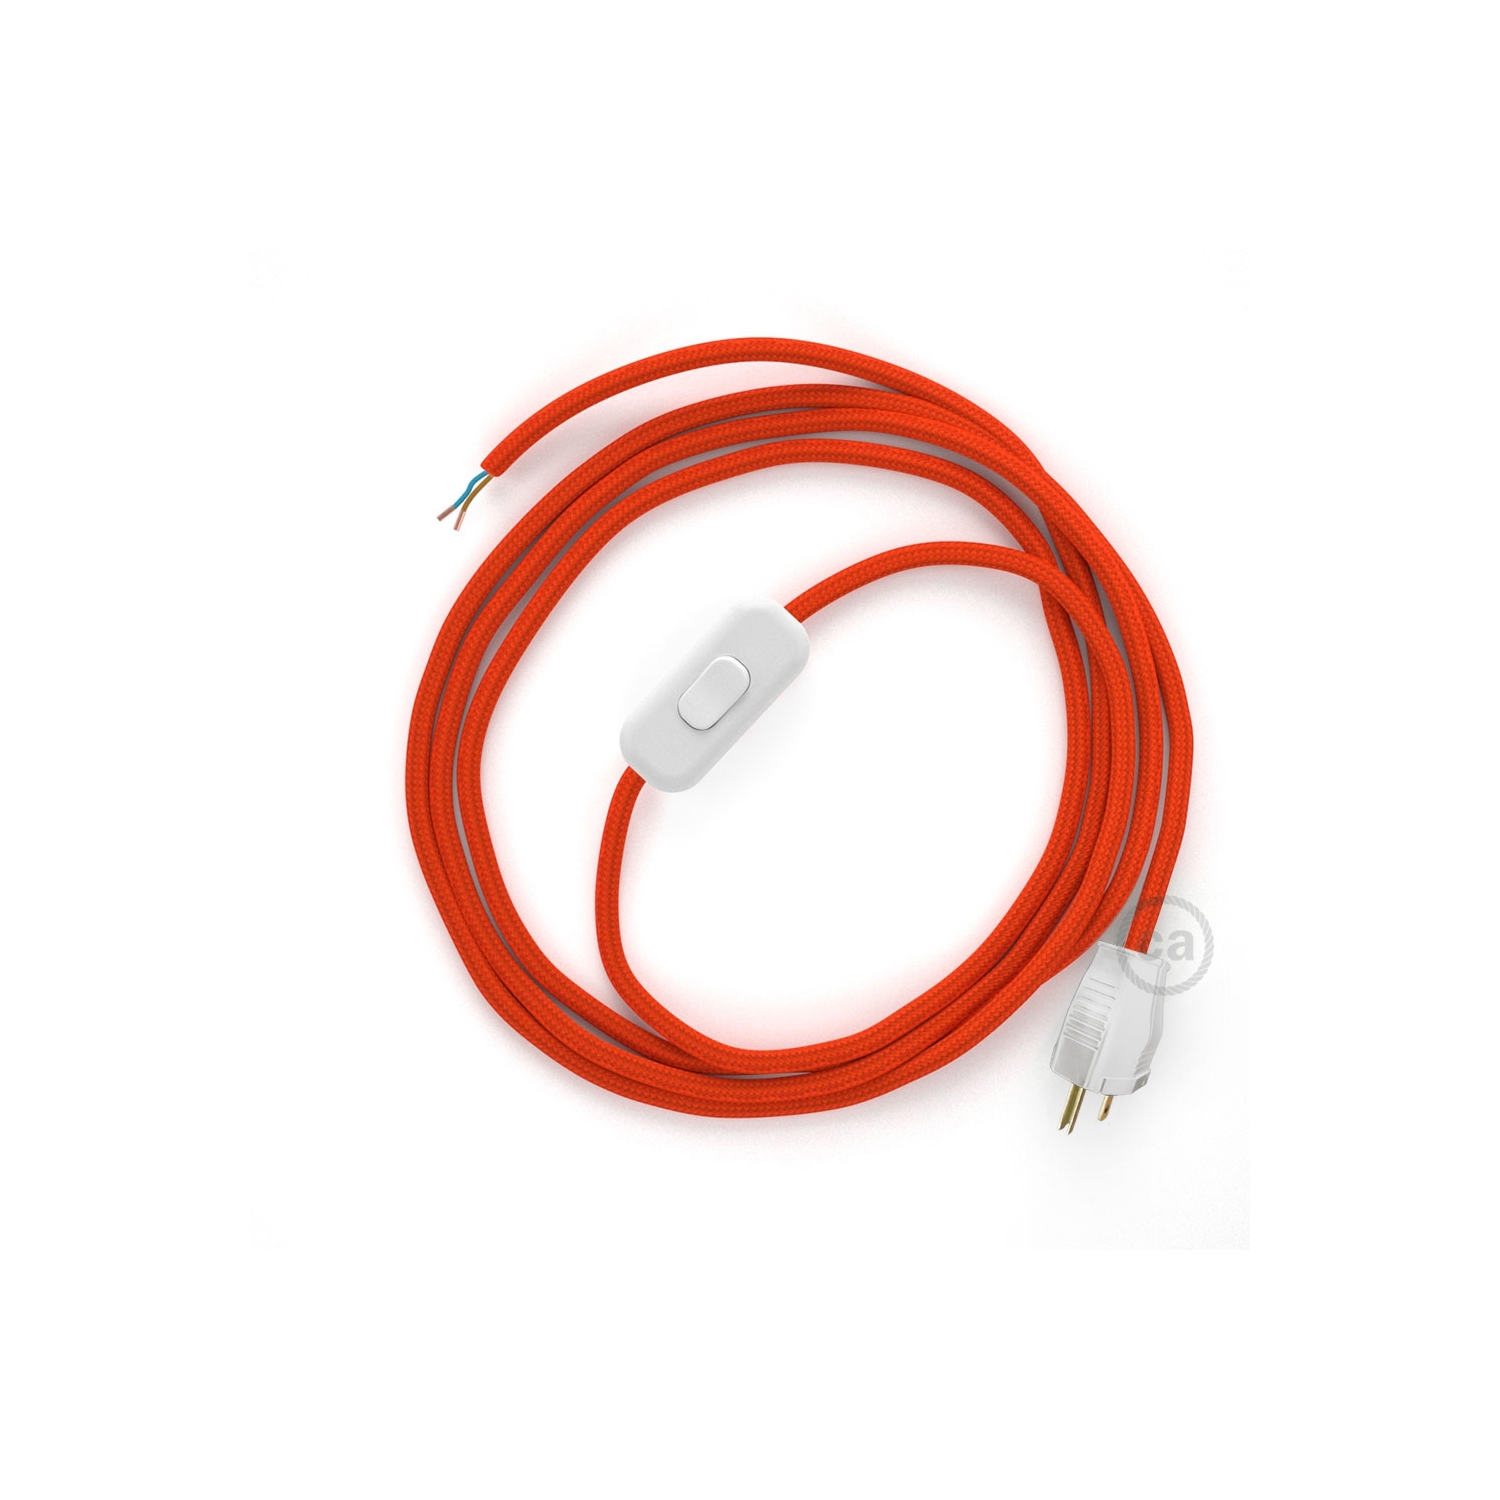 Power Cord with in-line switch, RM15 Orange Rayon - Choose color of switch/plug